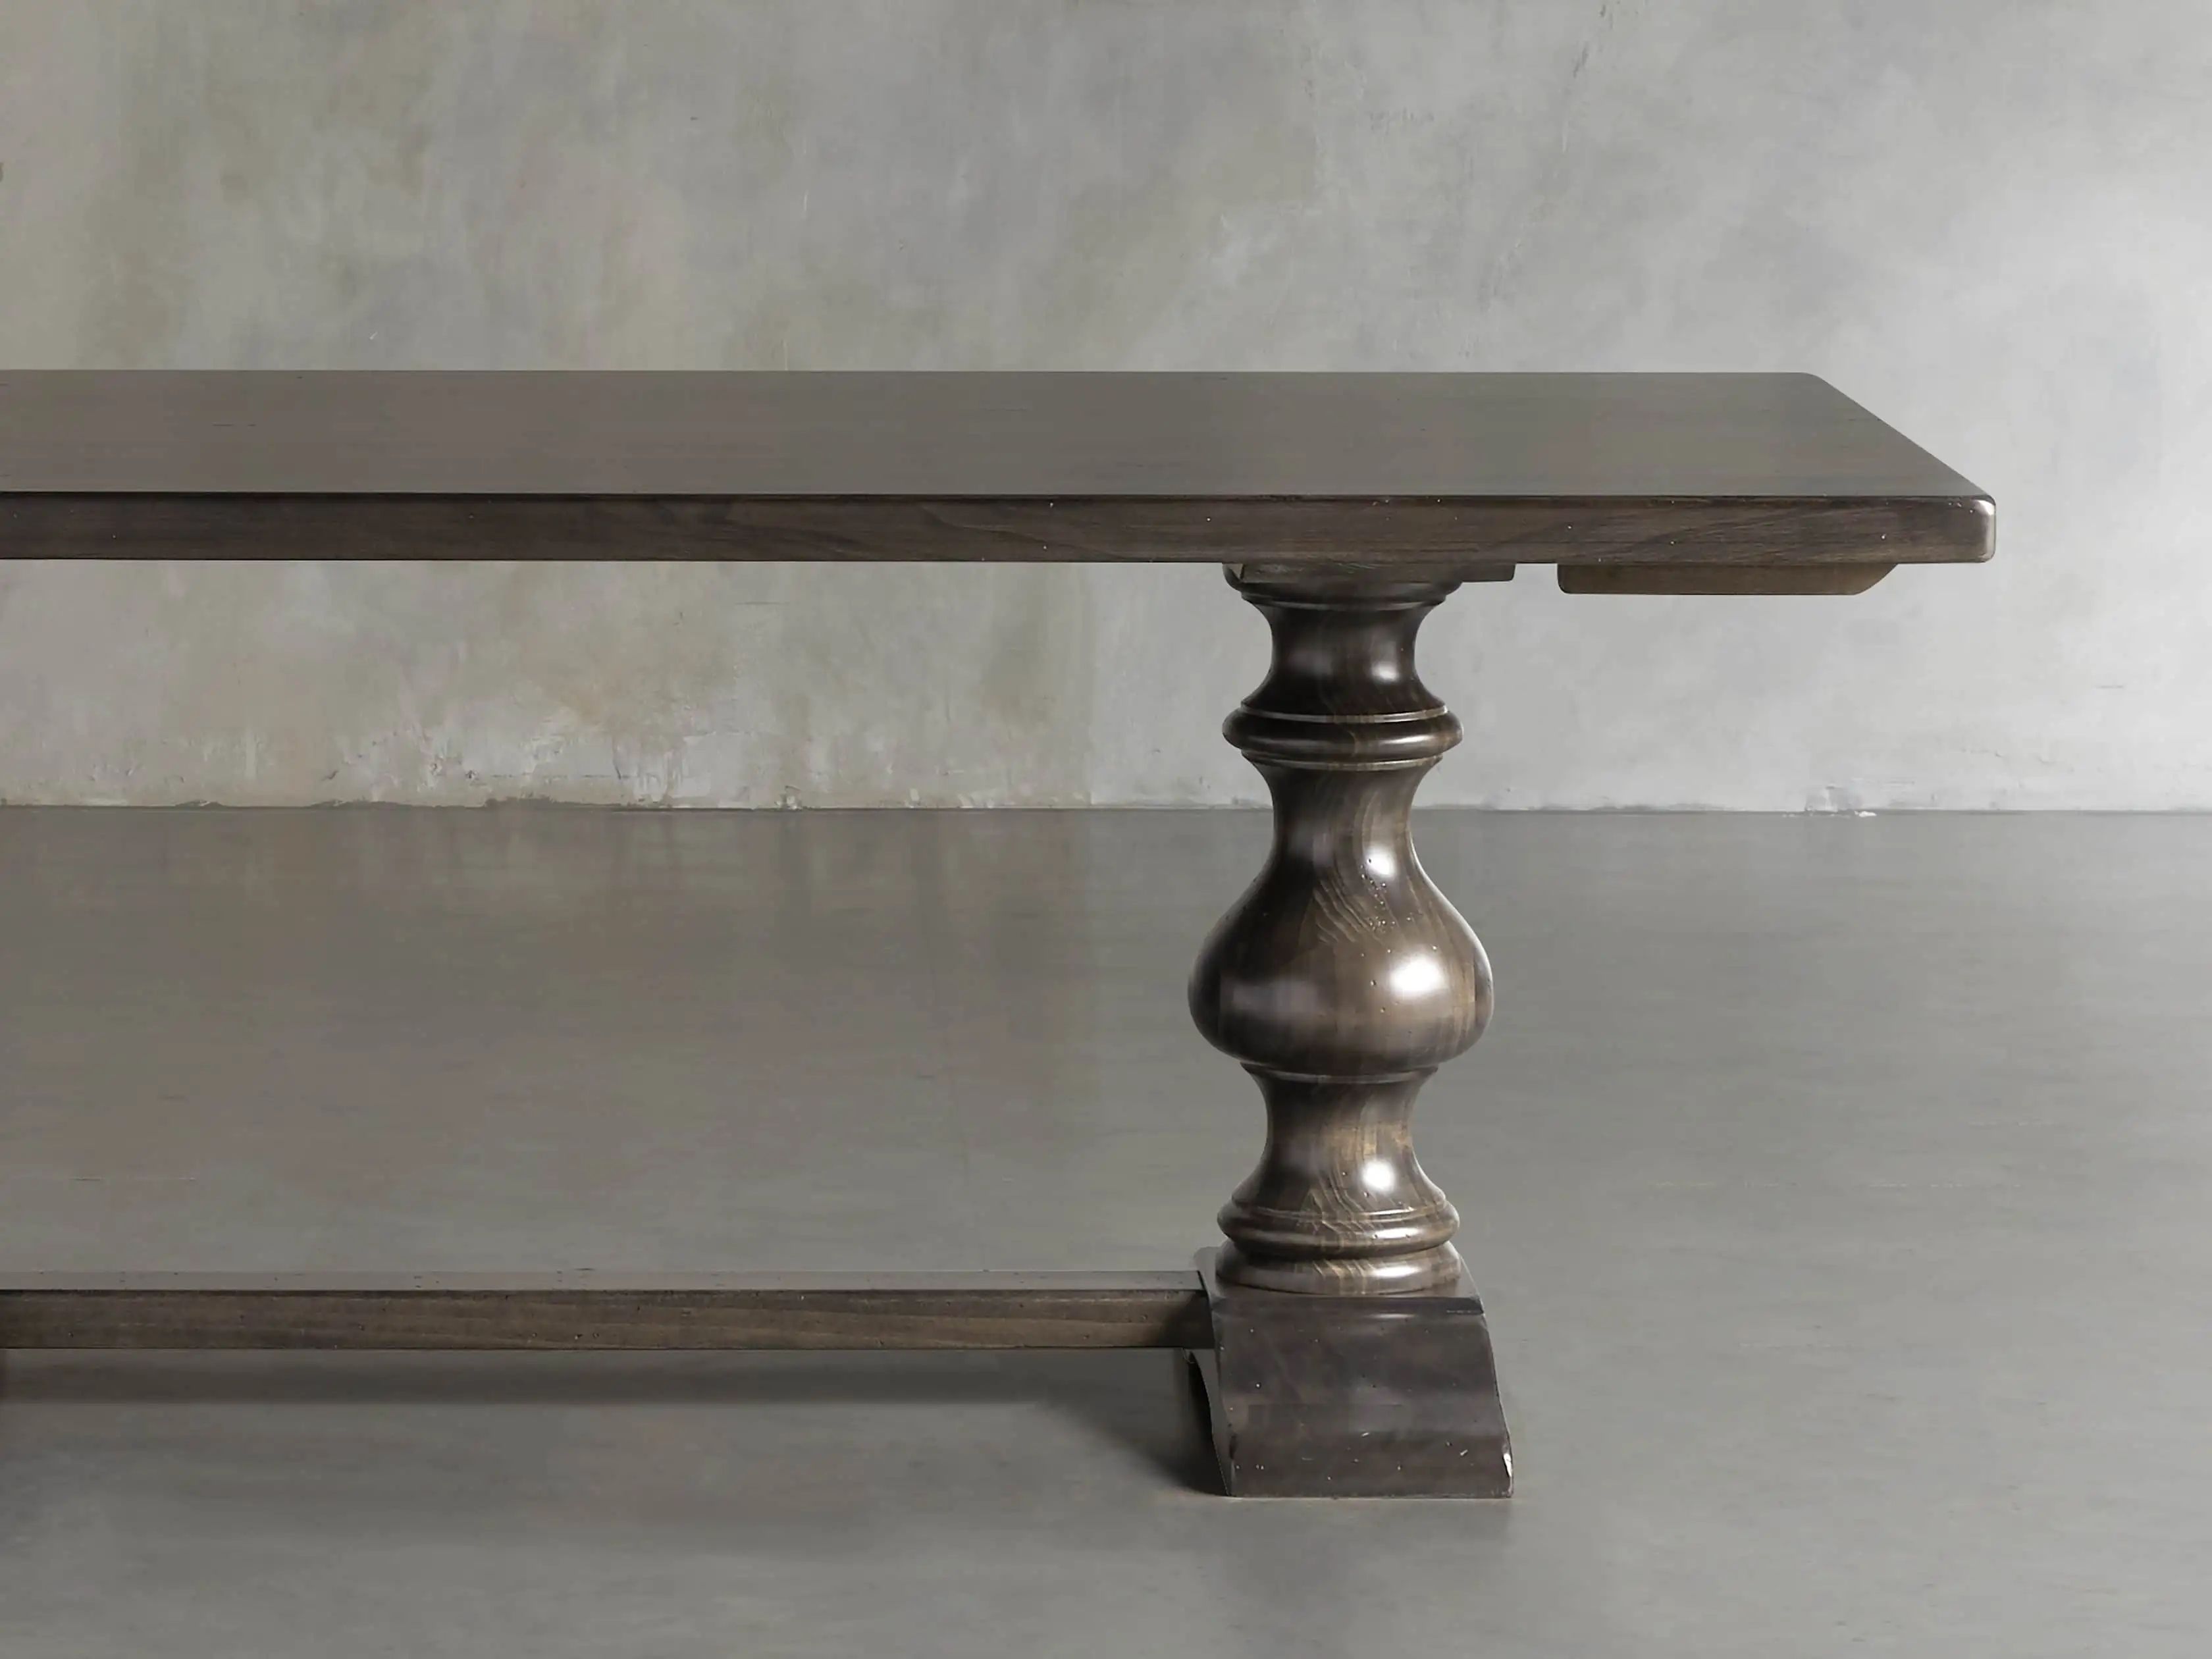 Tuscany 78"" x 39"" Extension Dining Table in Porfido | Arhaus